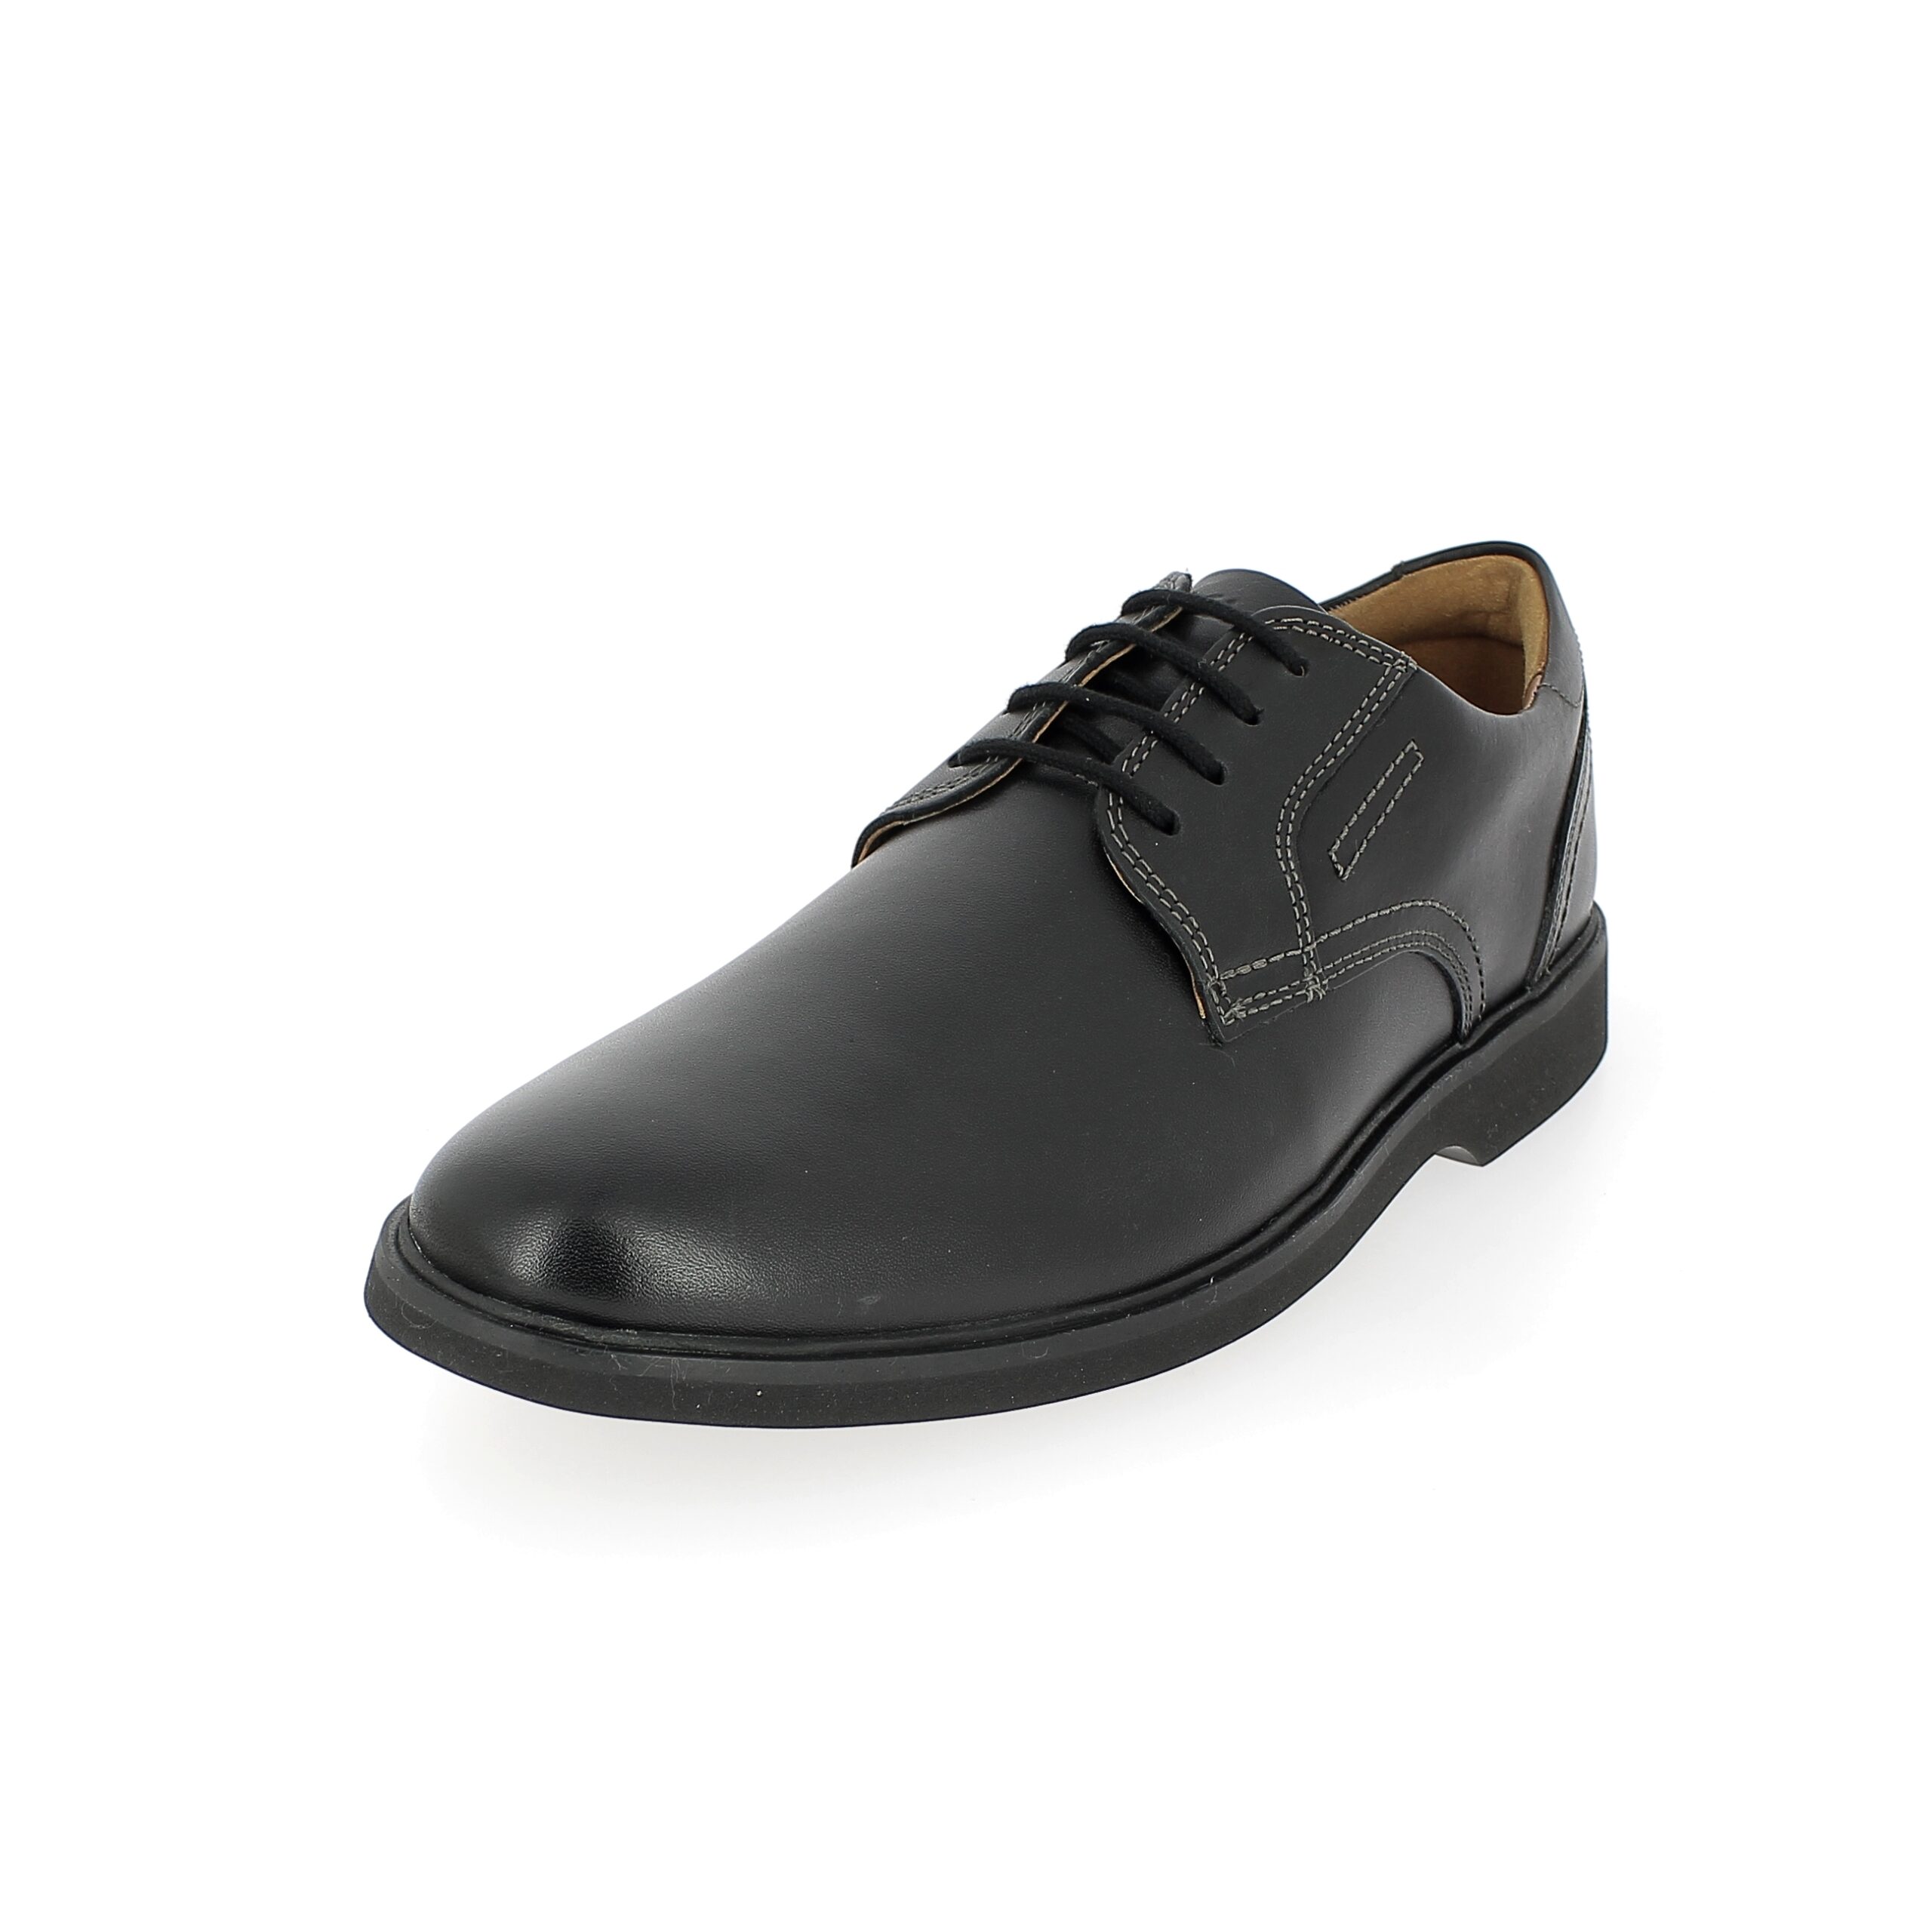 Clarks Shoes Malwood Lace Black | DSI Footcandy